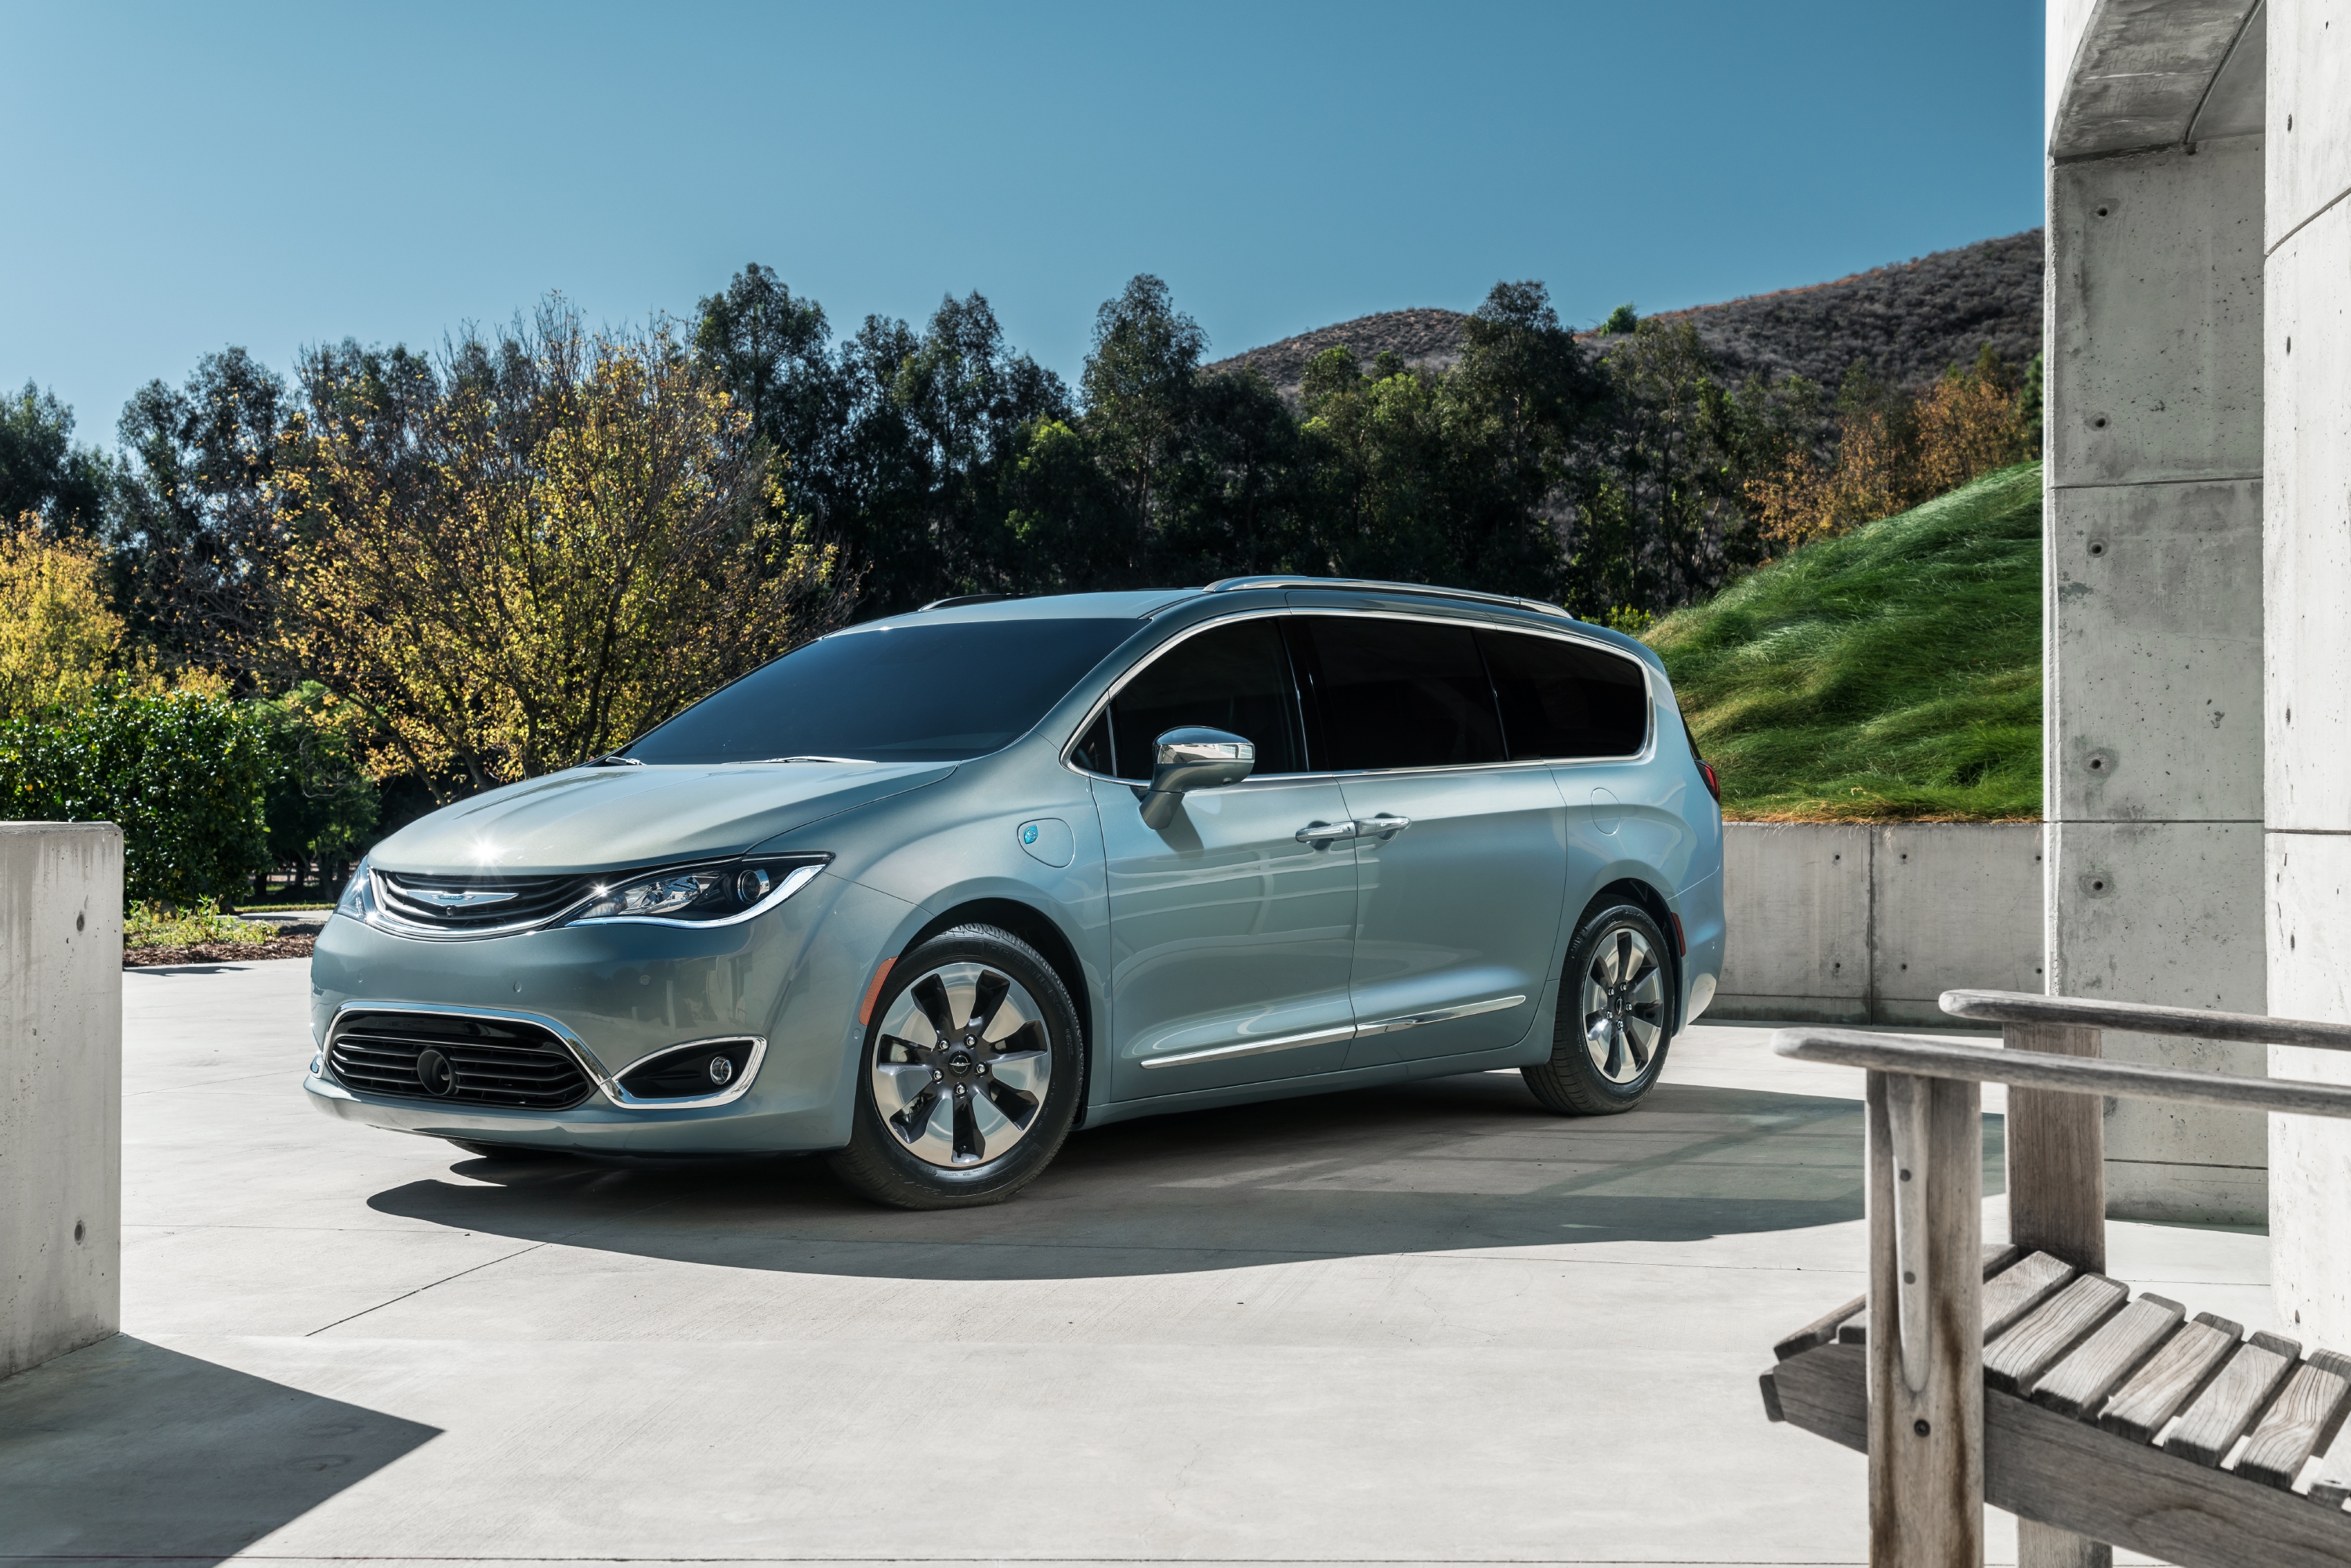 New Chrysler Pacifica gets official Fuel Economy Ratings